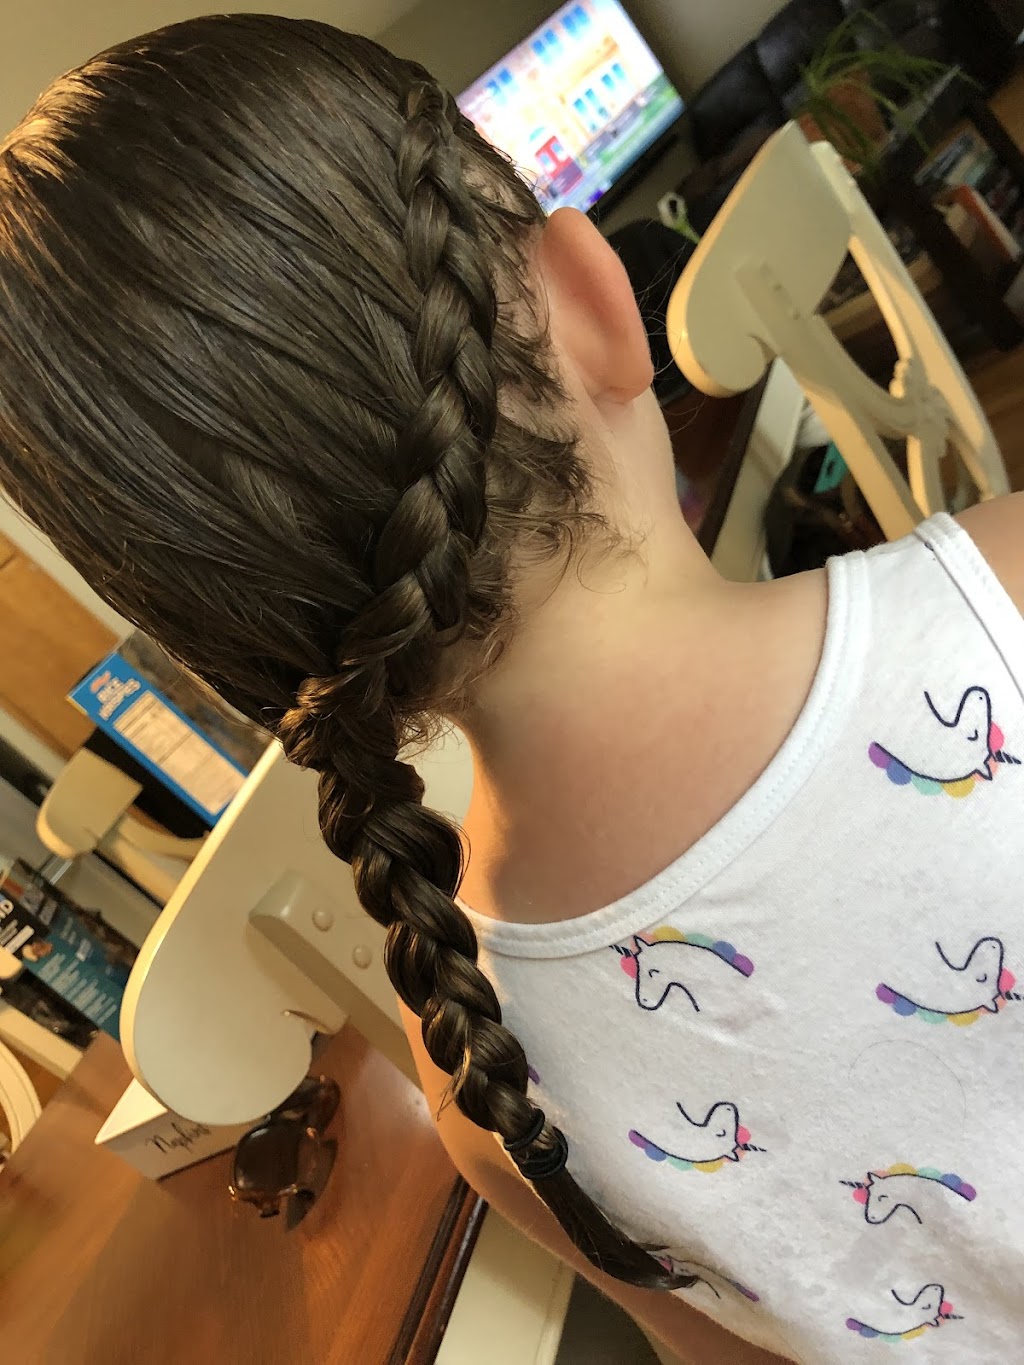 North Country Kids Hair Salon | 100 N Country Rd, Miller Place, NY 11764 | Phone: (631) 331-4247